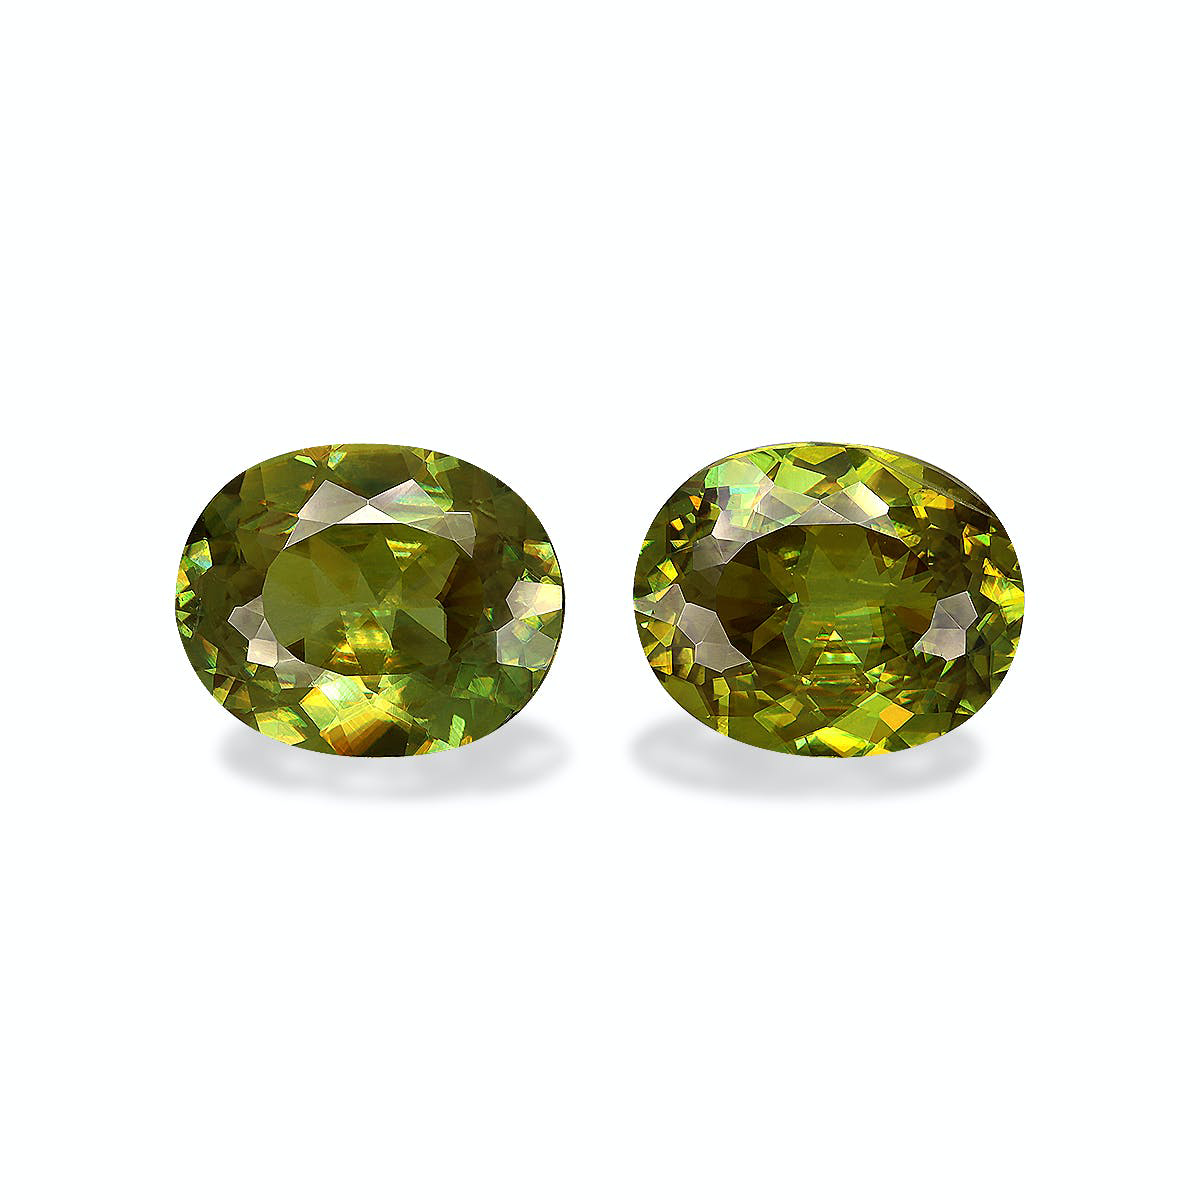 Picture of Lime Green Sphene 9.12ct - 12x10mm Pair (SH1085)